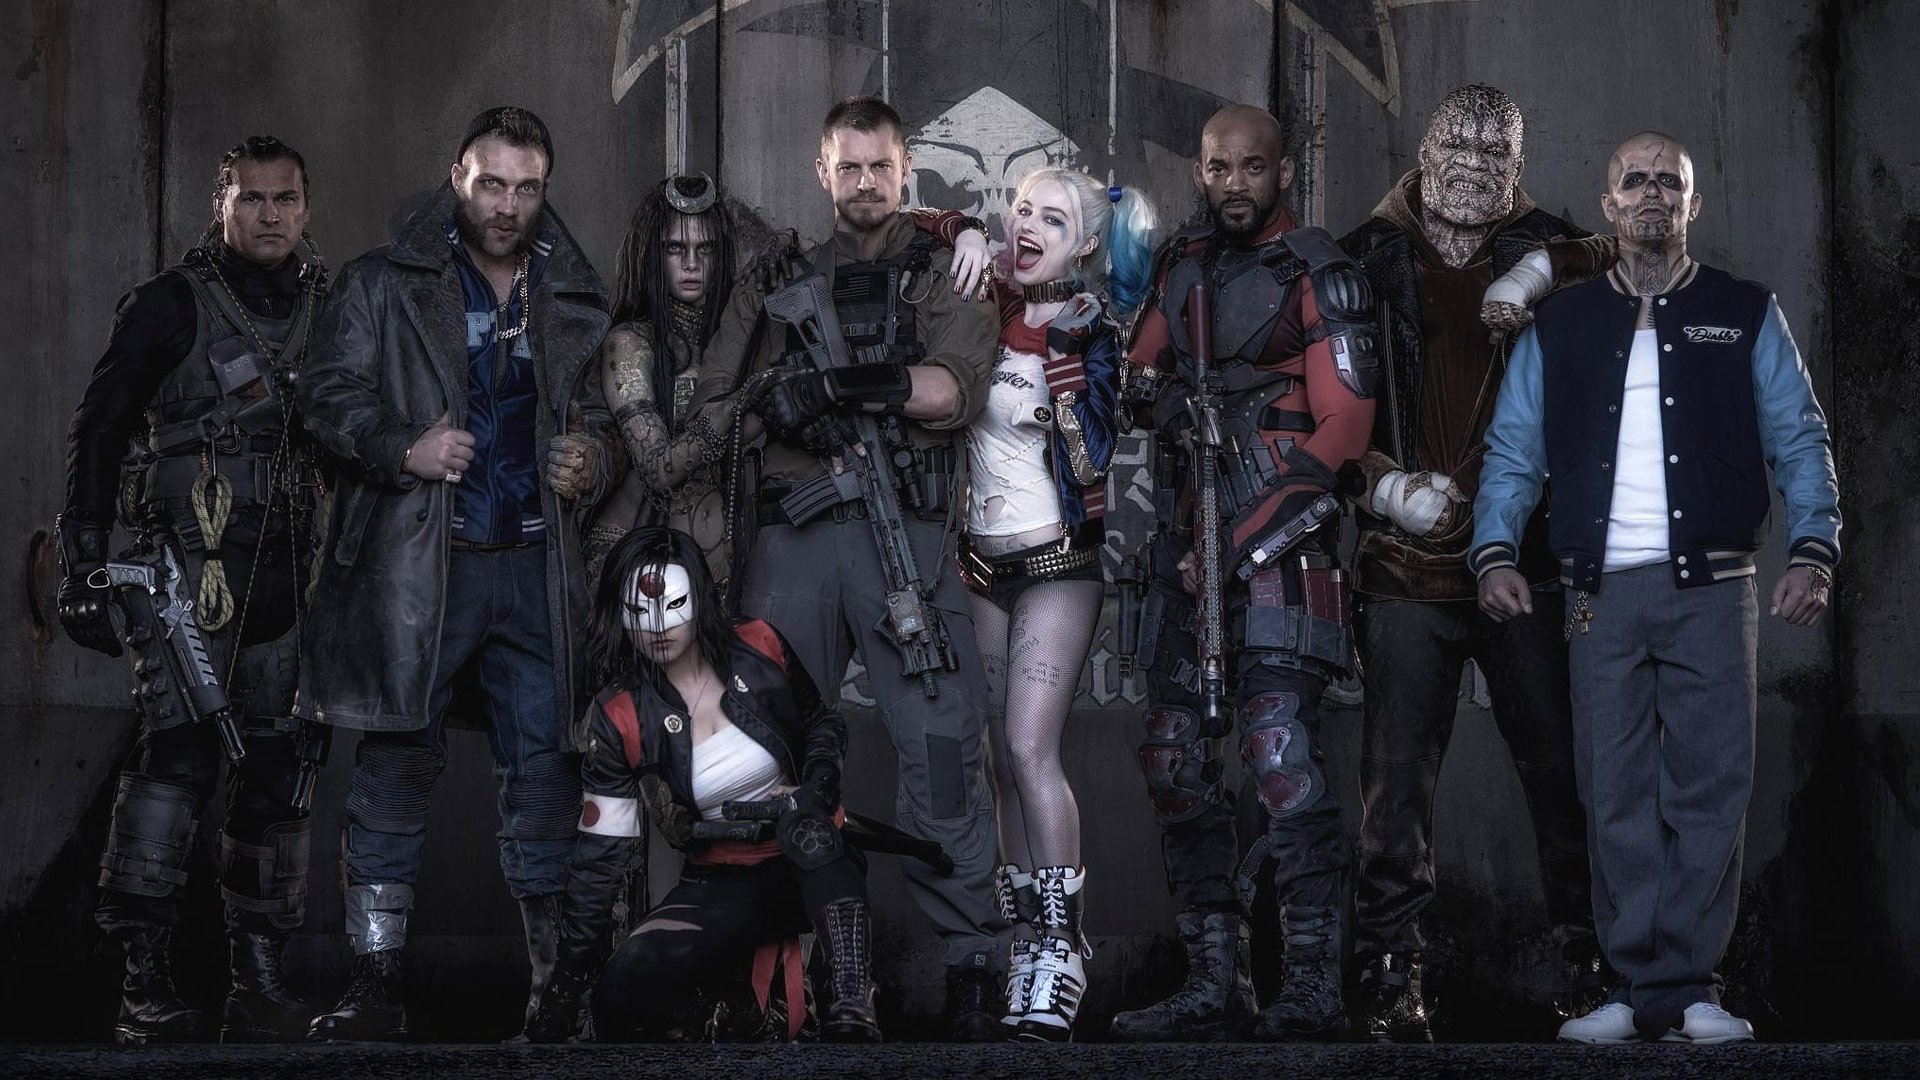 Suicide squad 2016 wallpaper Free full hd wallpapers for 1080p